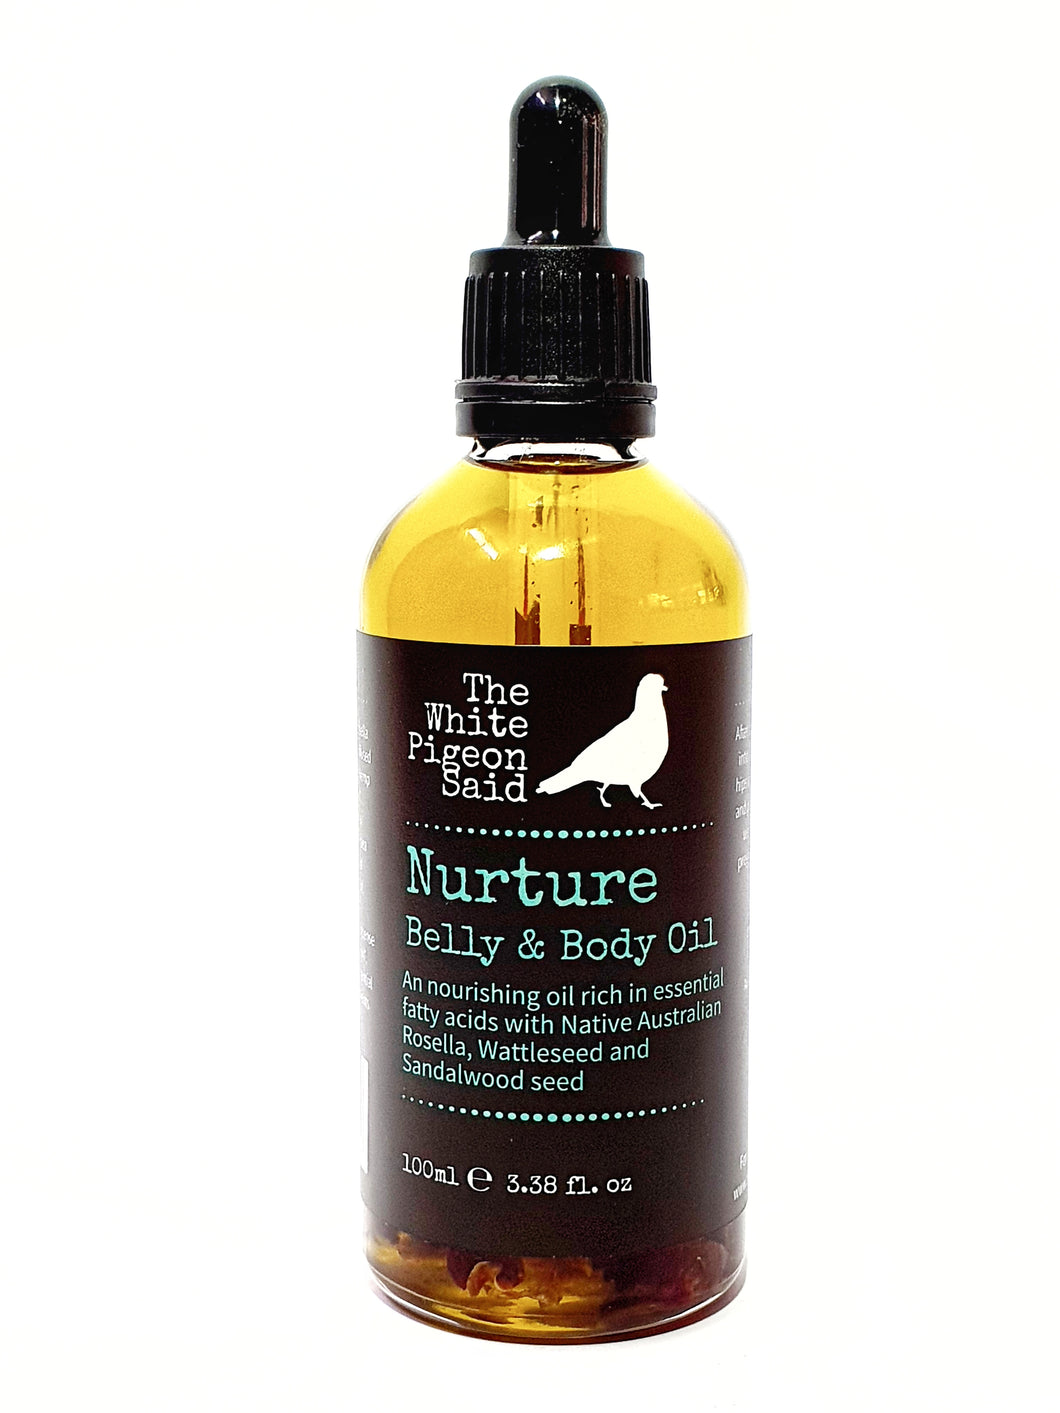 Belly and Body OIl | Nurture| Norurishing Oil 100ml | TheWhite Pigeon Said 